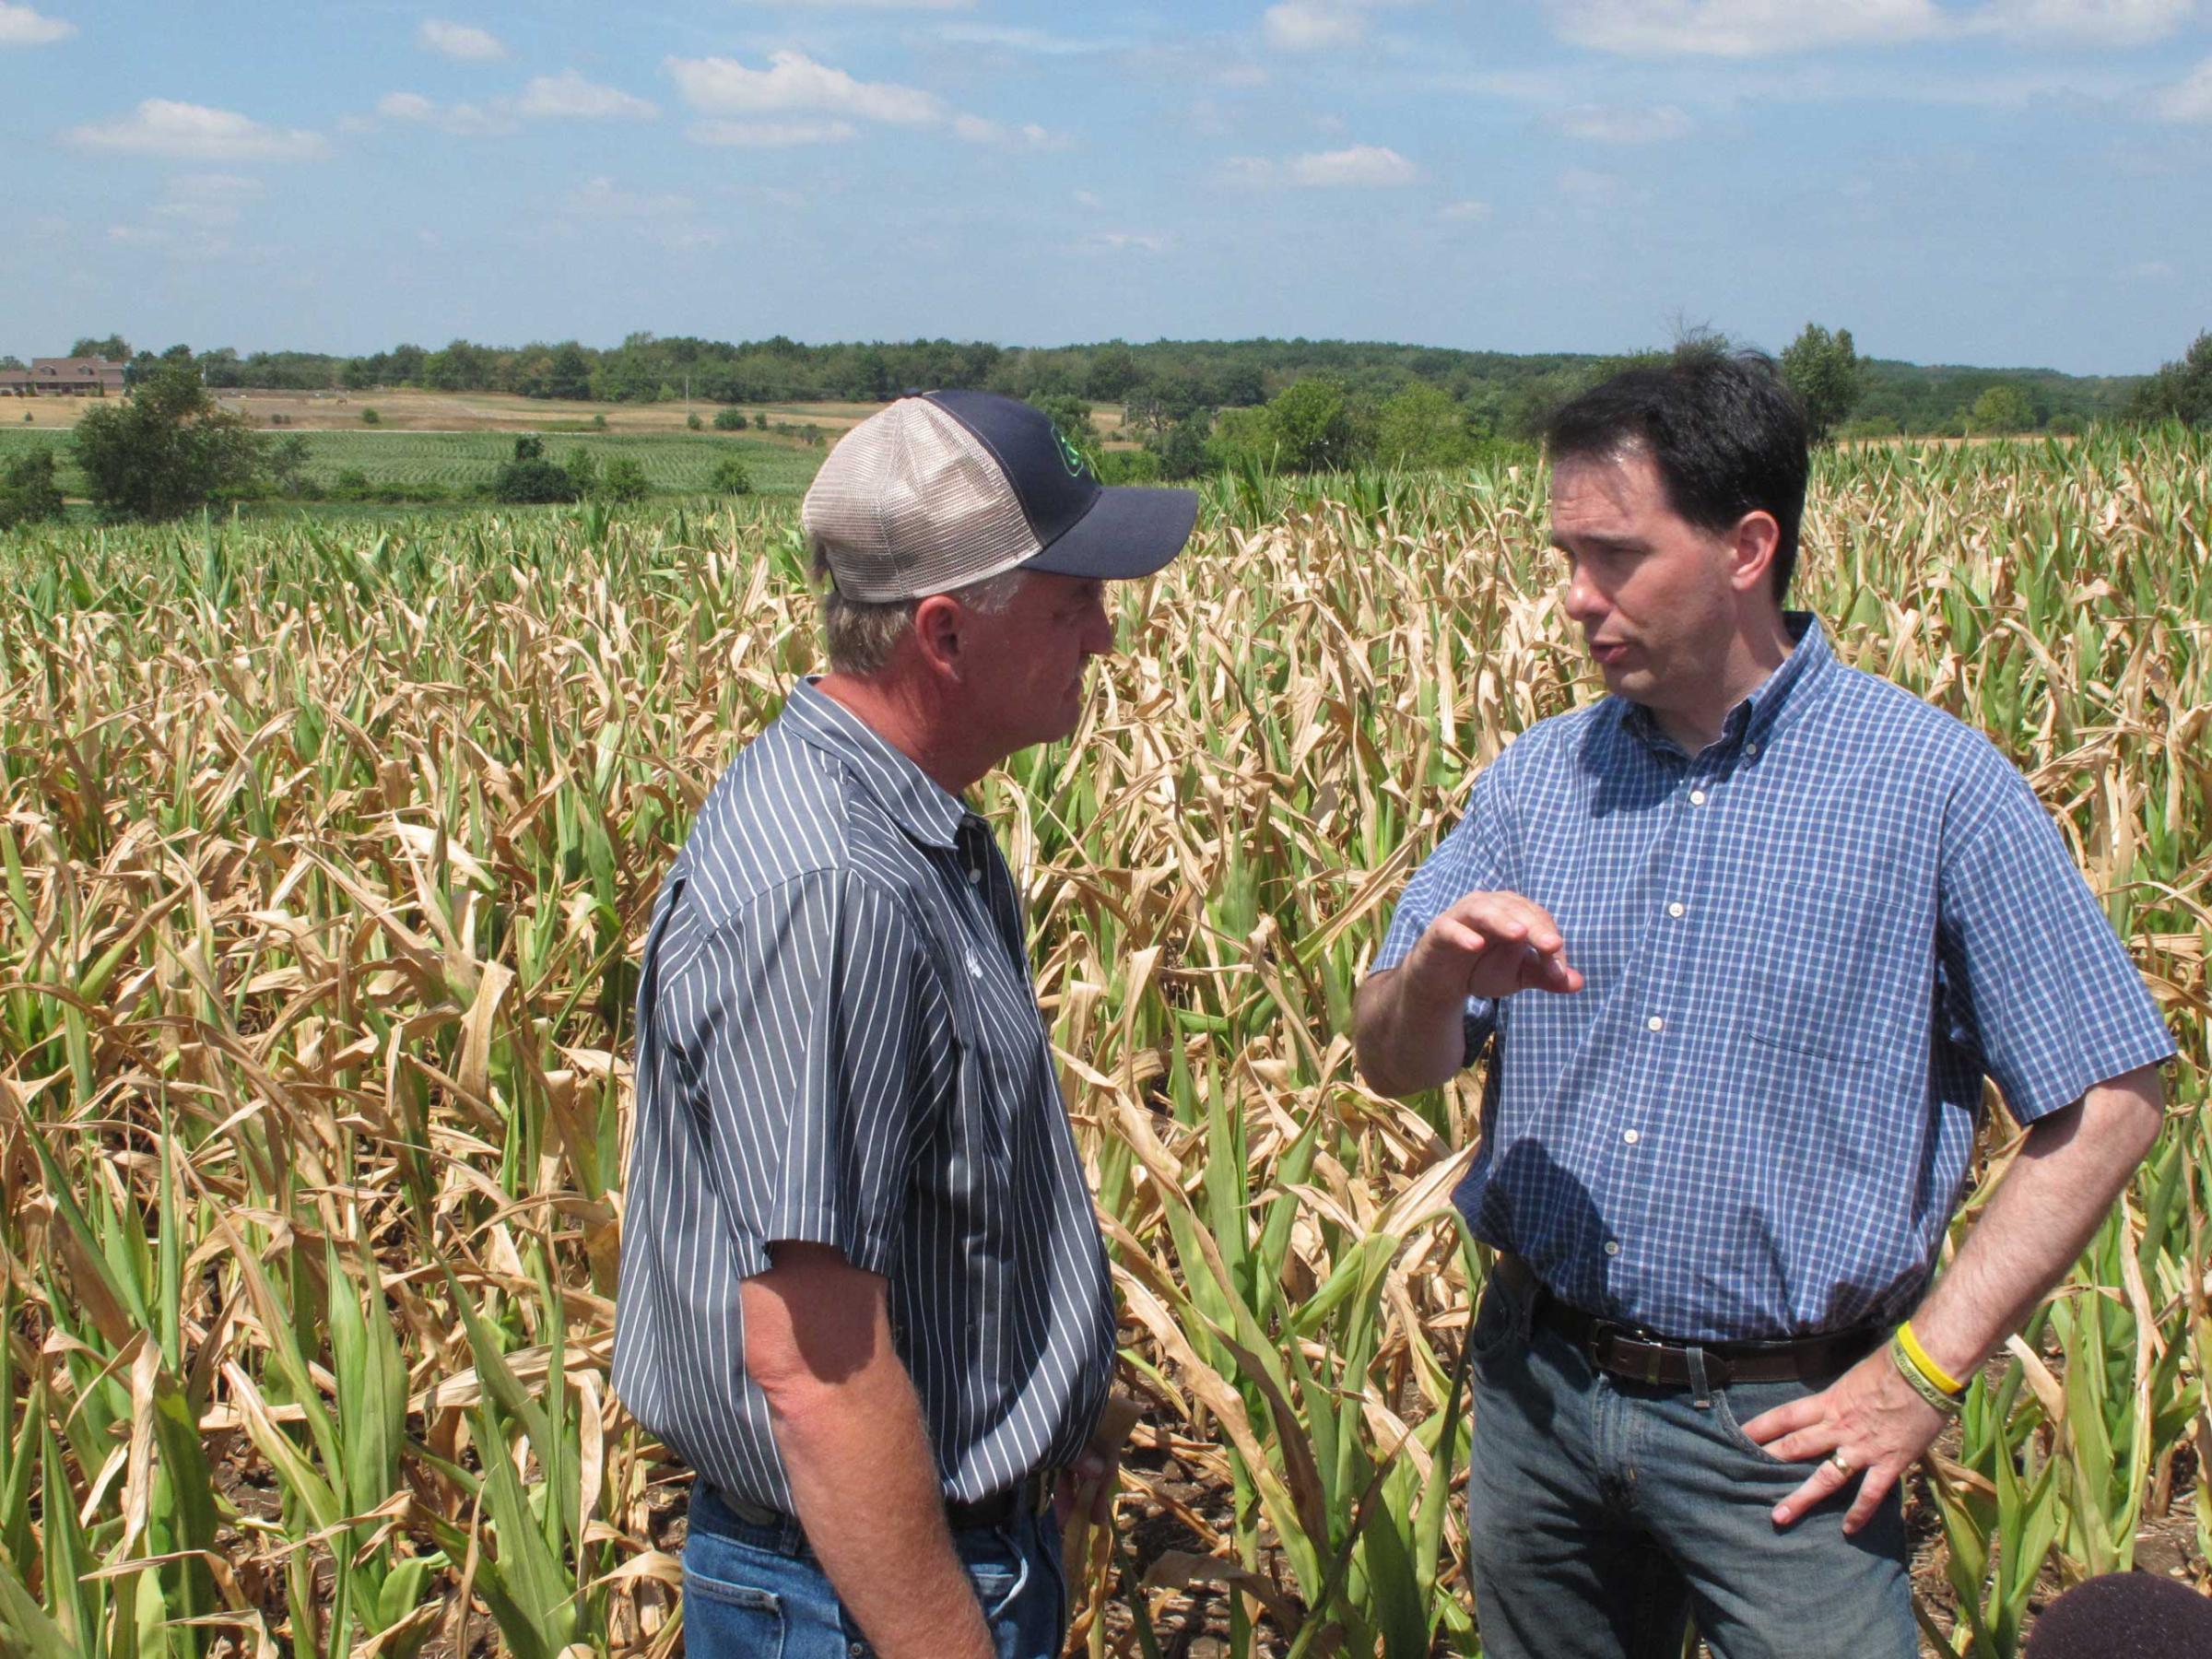 Gov. Scott Walker, right, talks with farmer Jeff Ehrhart about drought damage to his corn crop in the background in Burlington, Wis., on July 20, 2012.